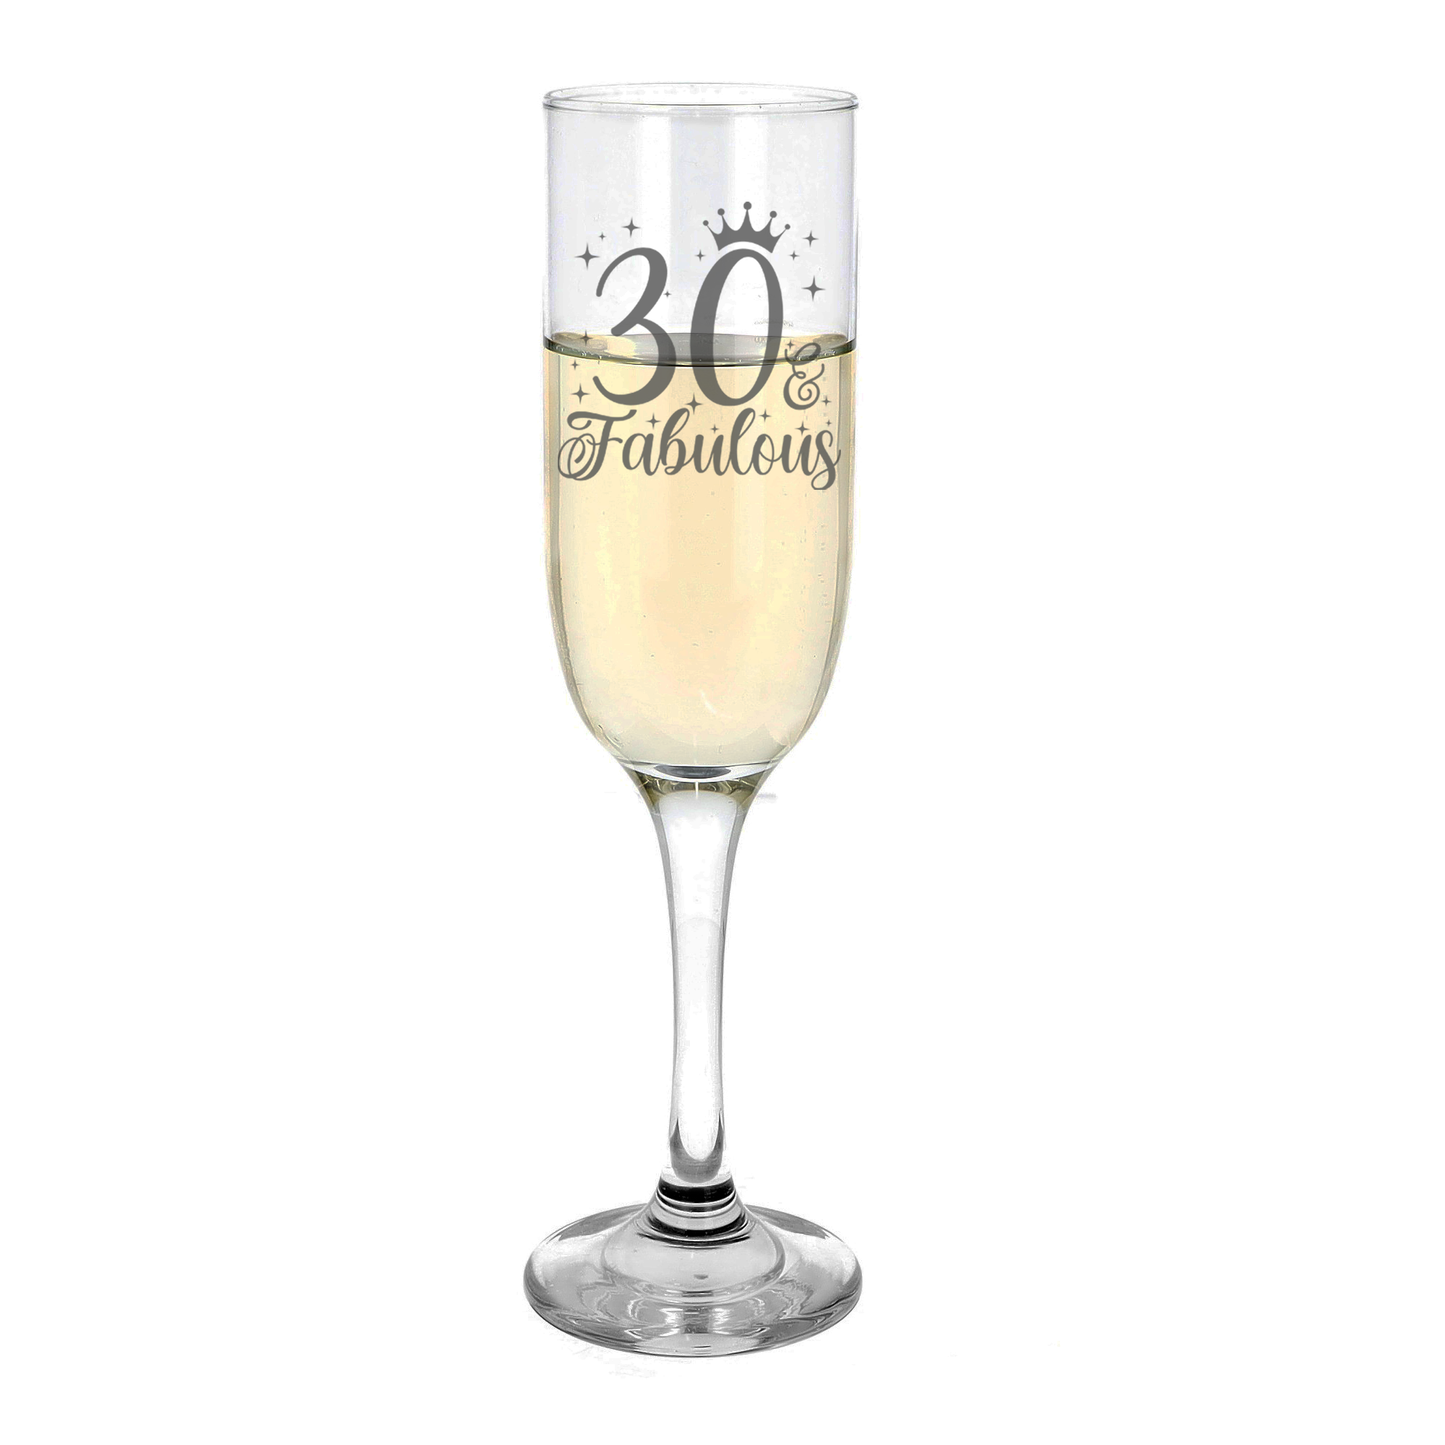 30 & Fabulous Engraved Champagne Glass and/or Coaster Set  - Always Looking Good -   